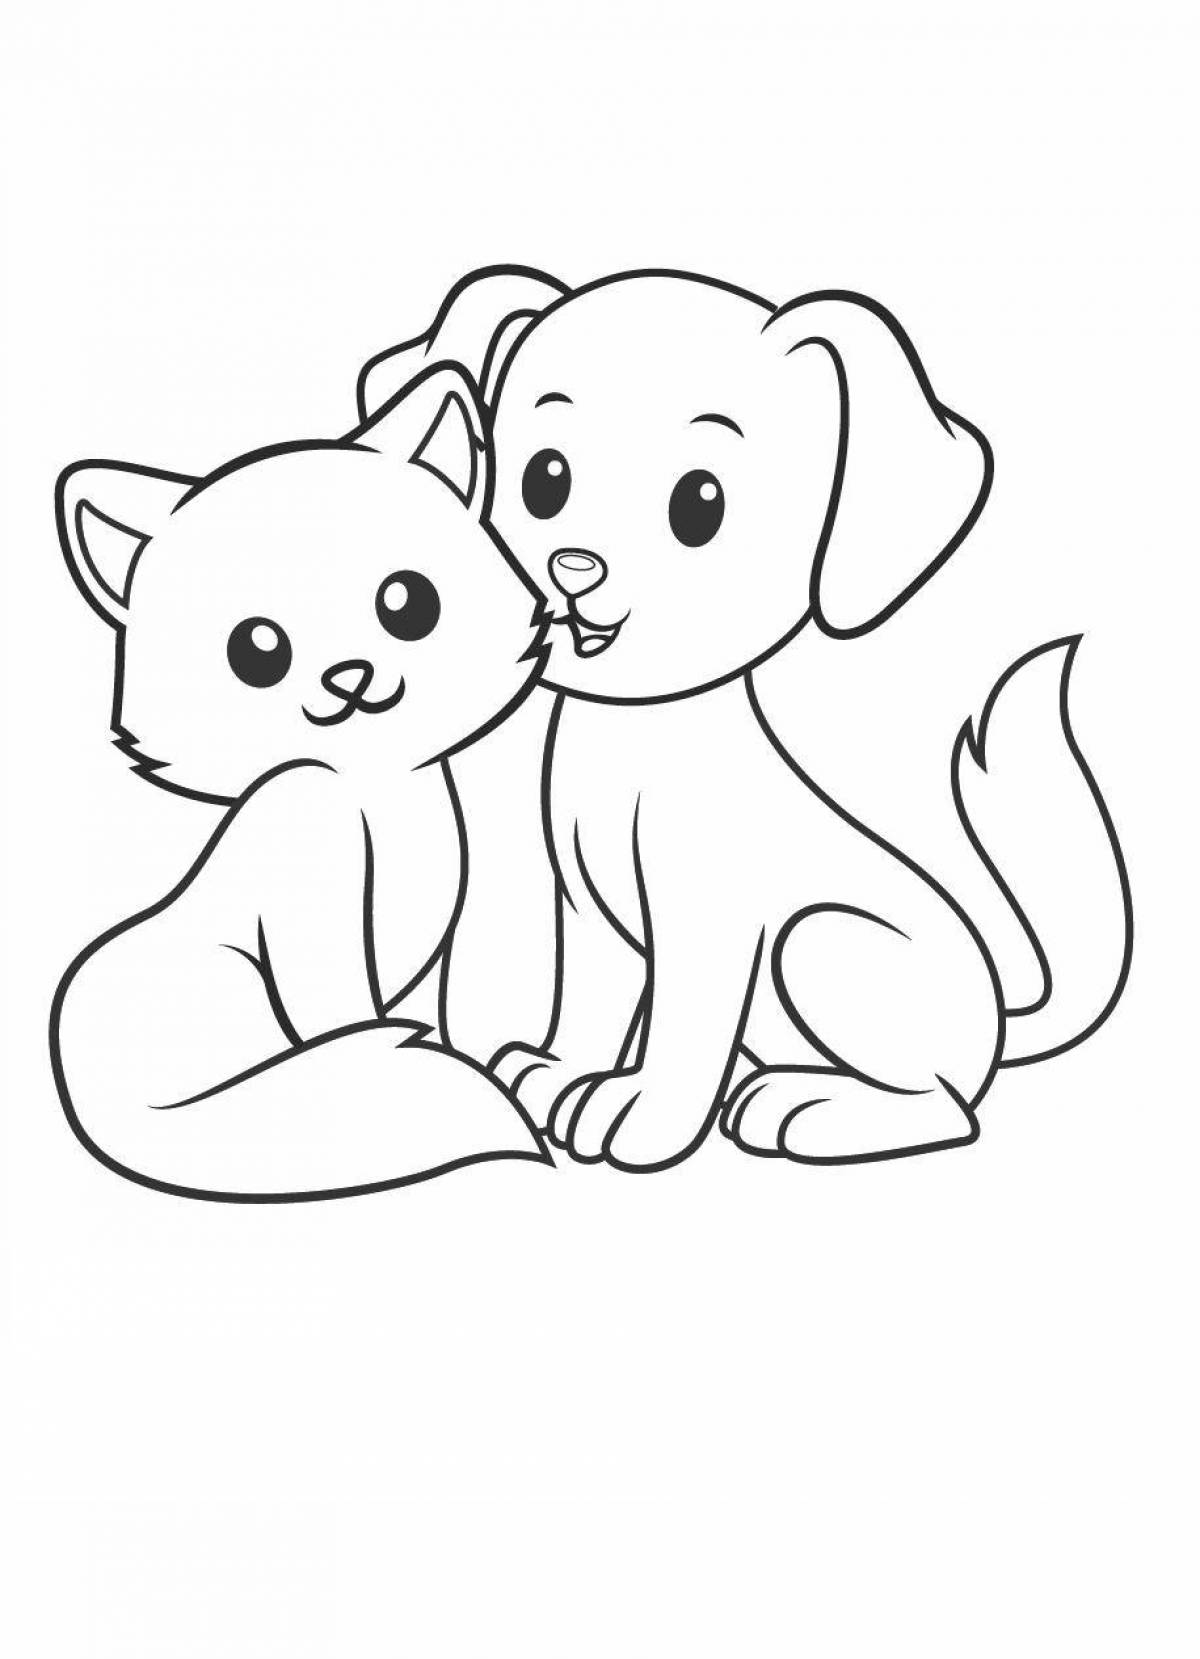 Coloring page adorable kitten and dog